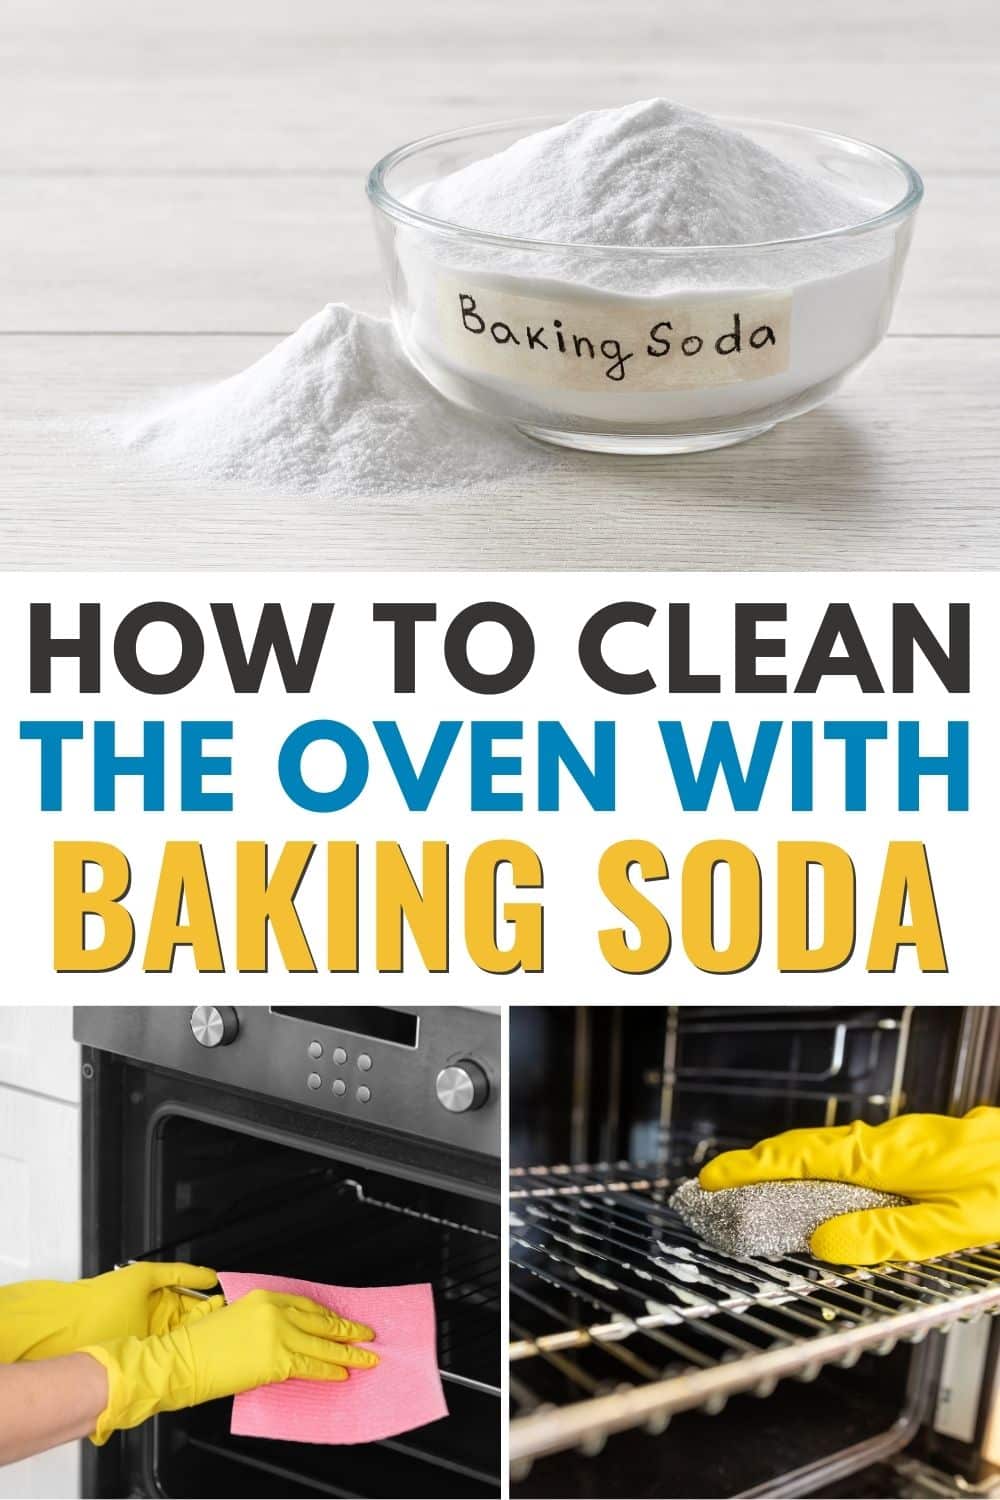 Learn how to clean your oven effectively using the natural cleaning power of baking soda.